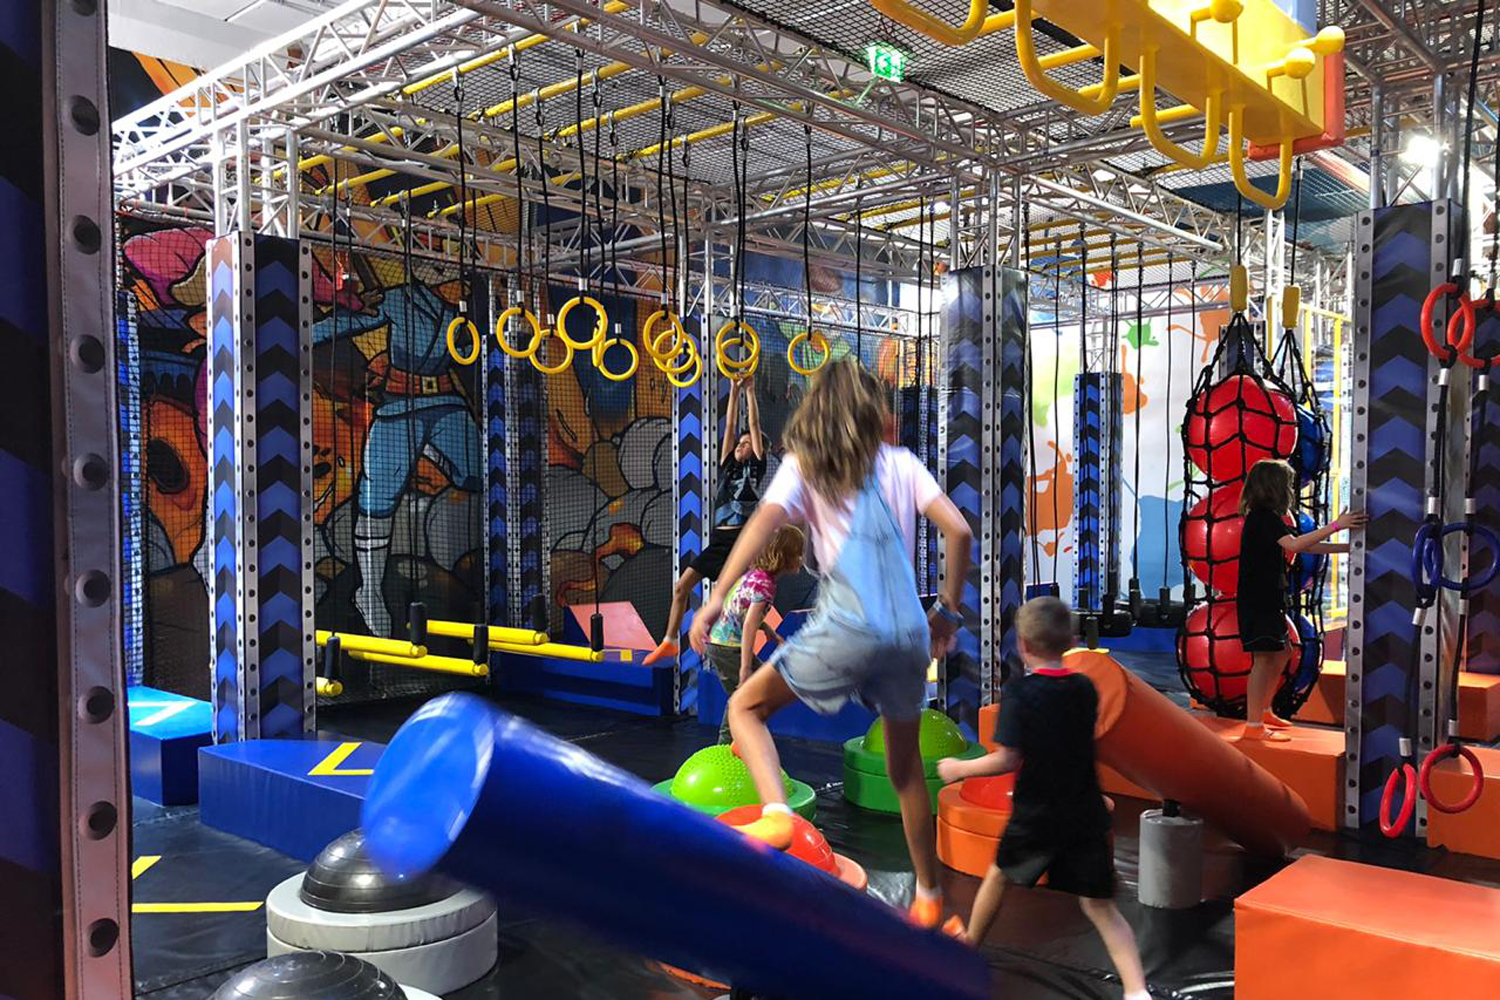 Air Maniax has opened in Abu Dhabi's Marina Mall | Time Out Abu